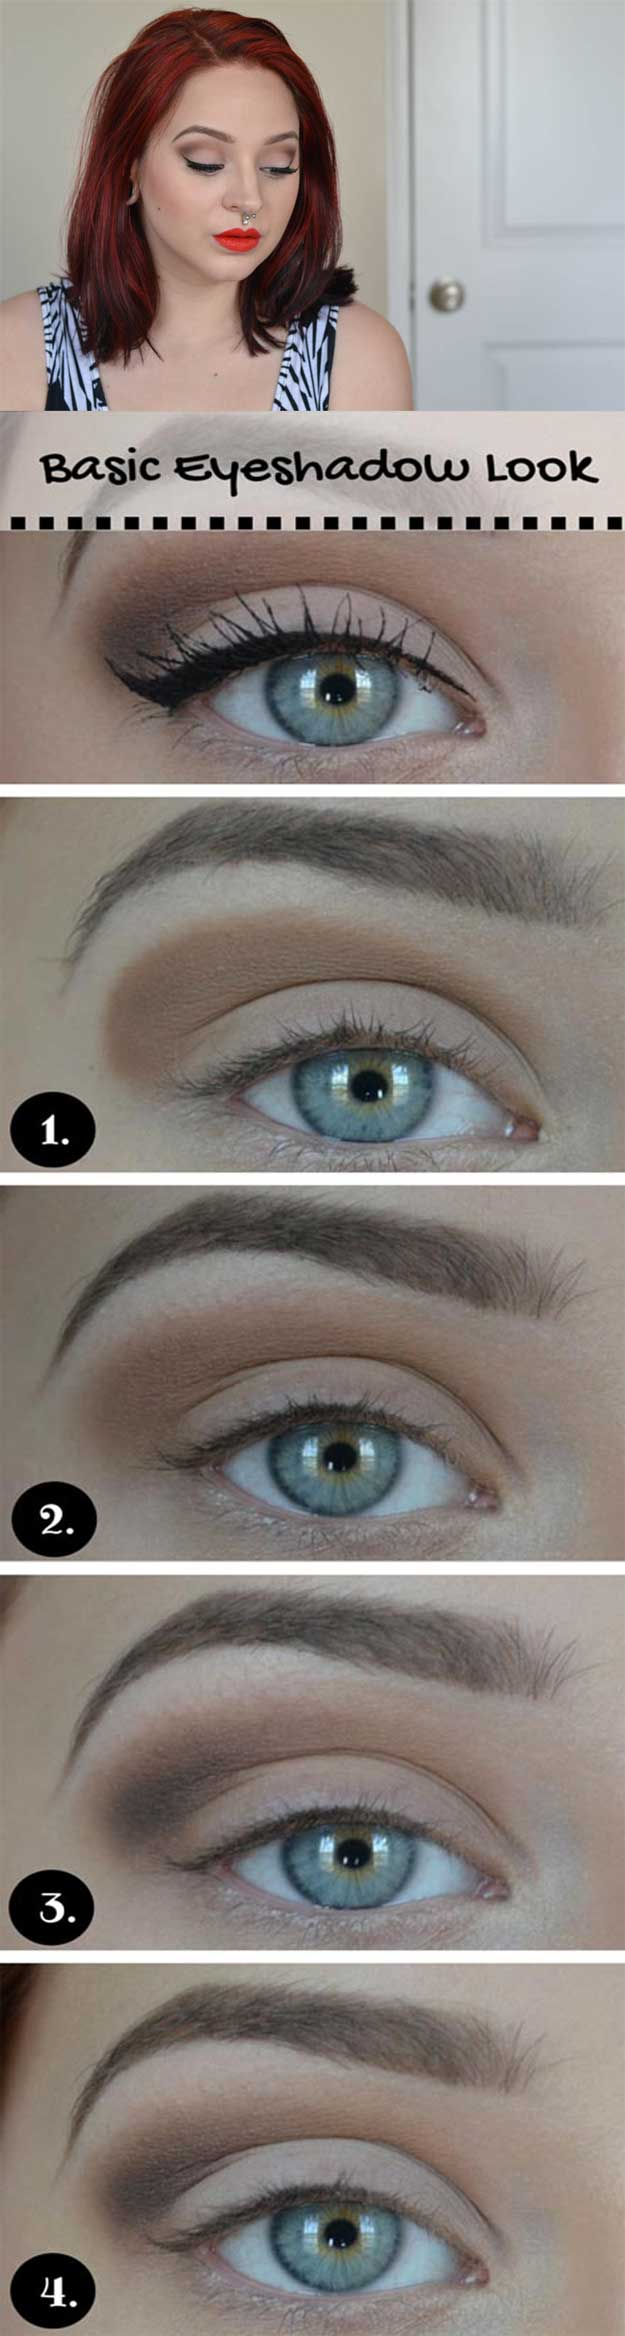 Makeup Tips For Fair Skin And Blue Eyes 35 Wedding Makeup For Blue Eyes The Goddess